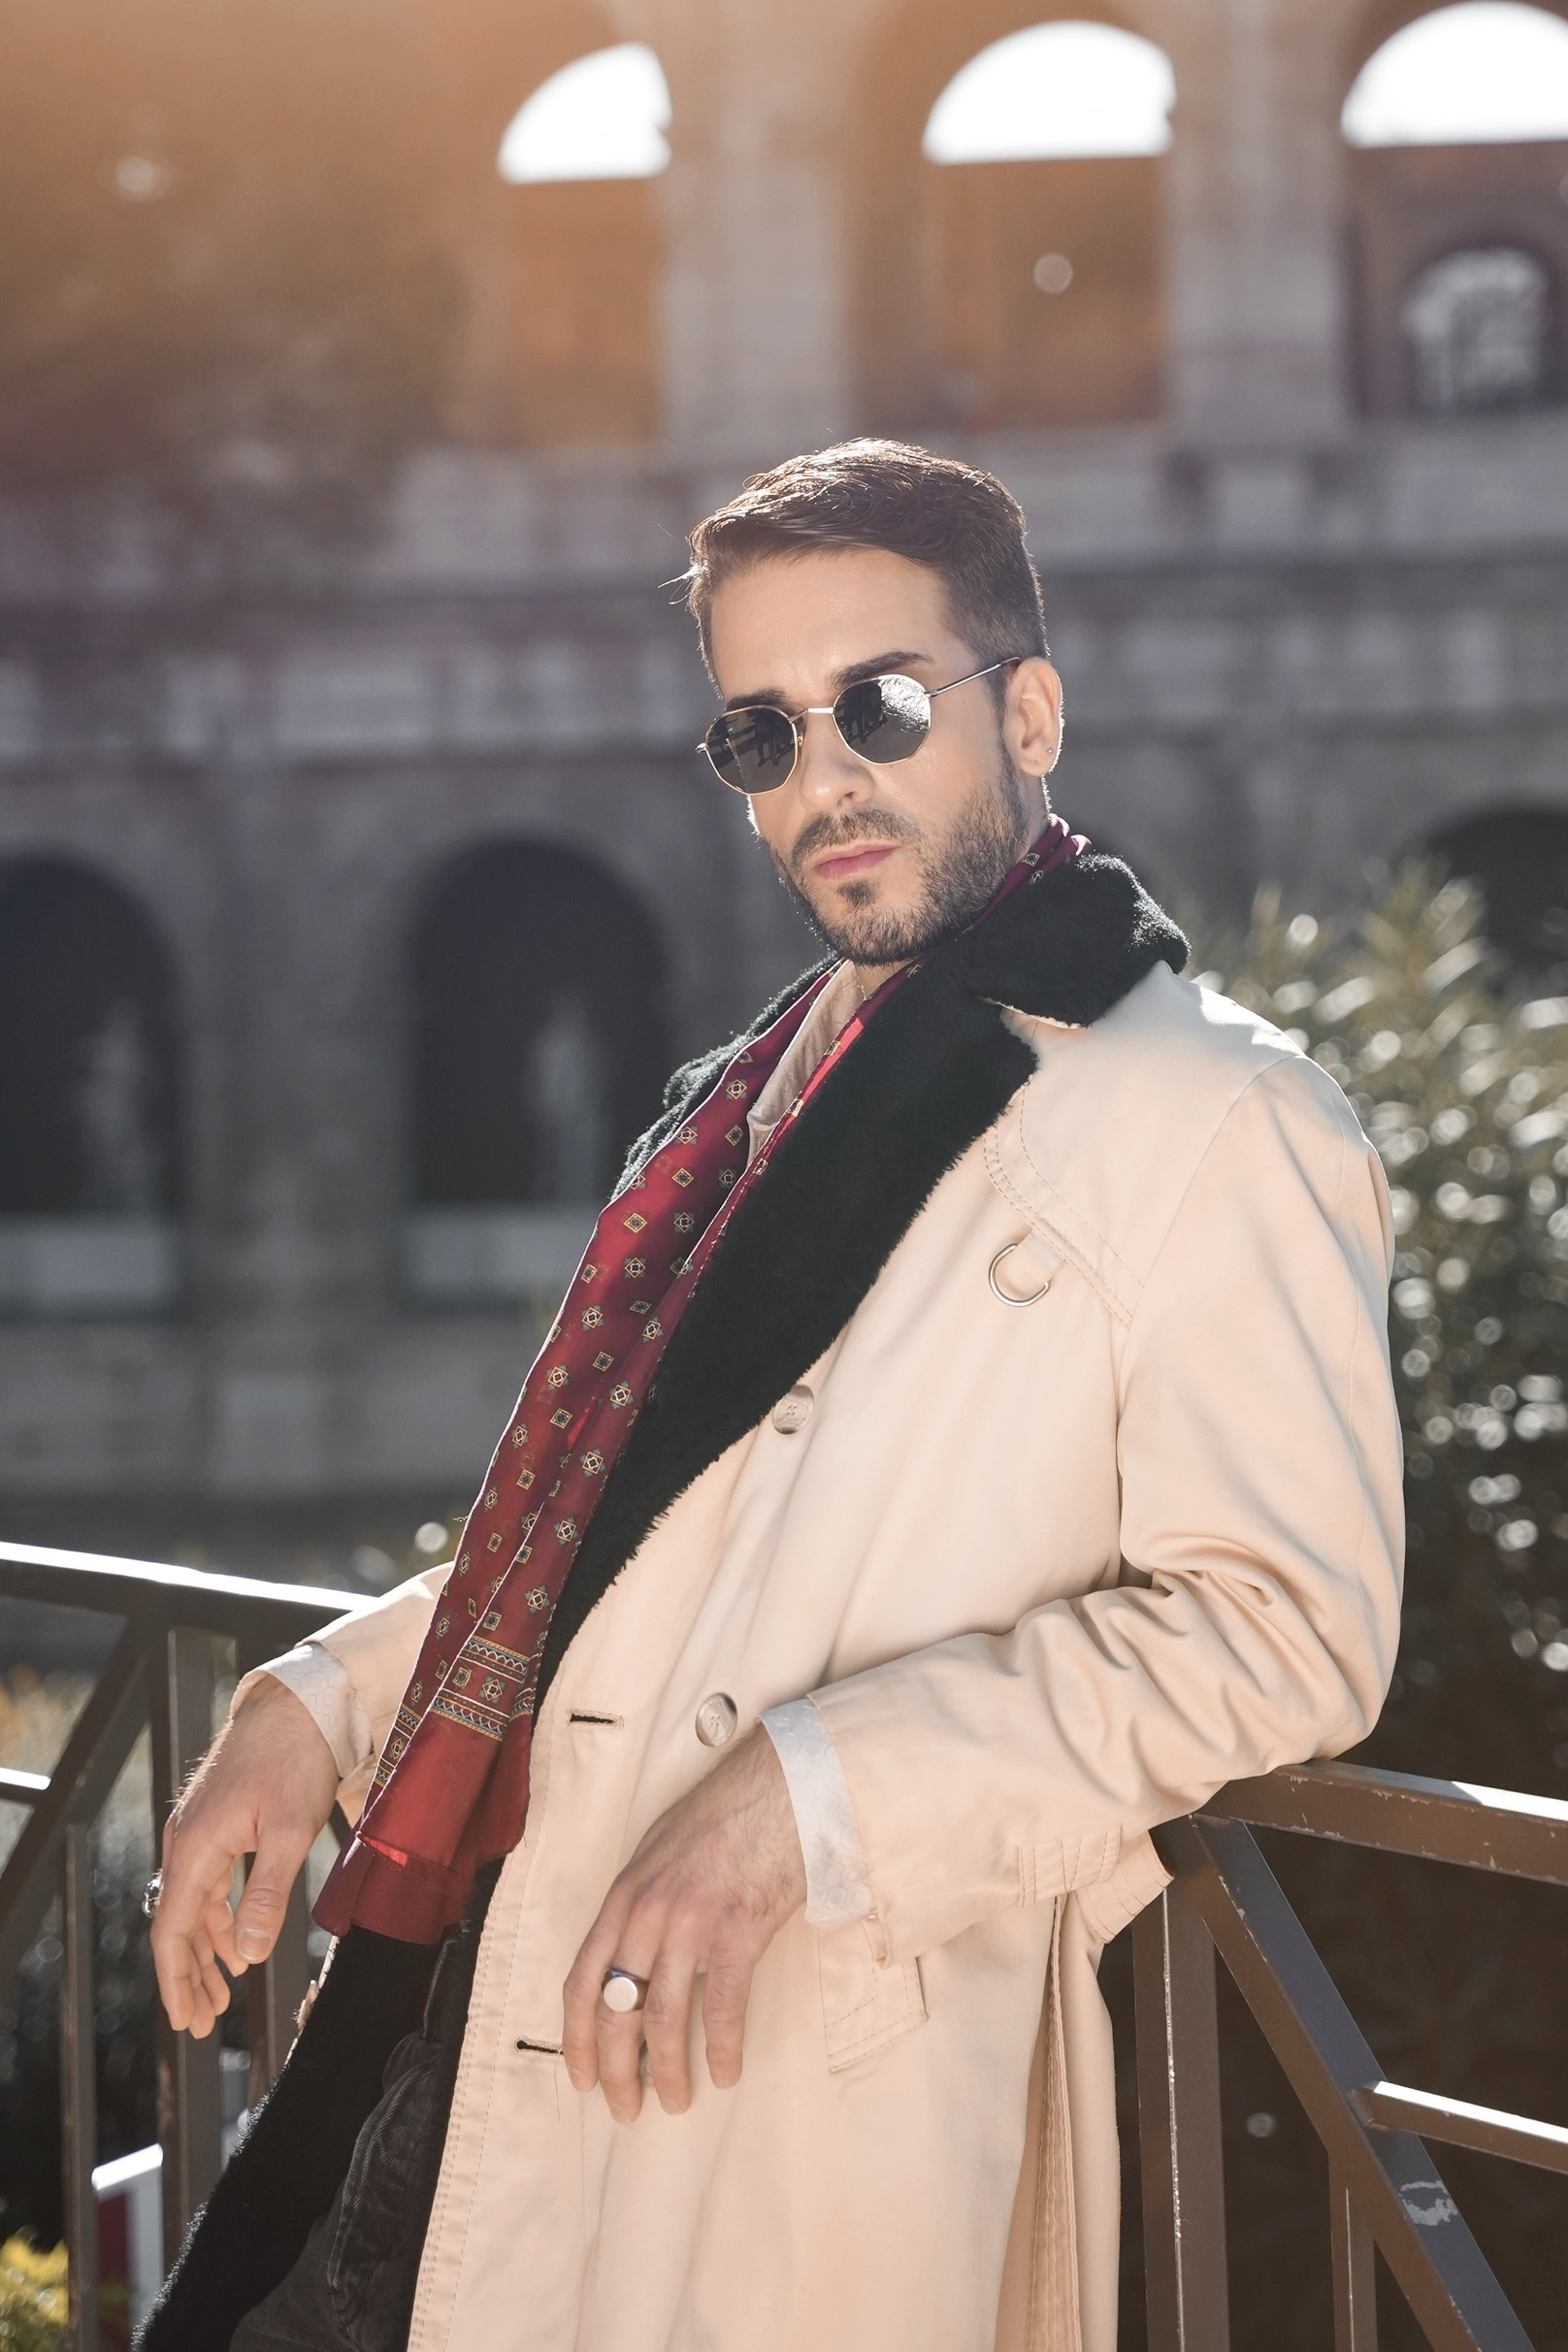 Memorí Men's sunglasses are the best men's sunglasses for small faces. Shown here in a hexagonal shape and modeled in front of the Colosseum in Rome by an Italian man with dark hair and a beard. 